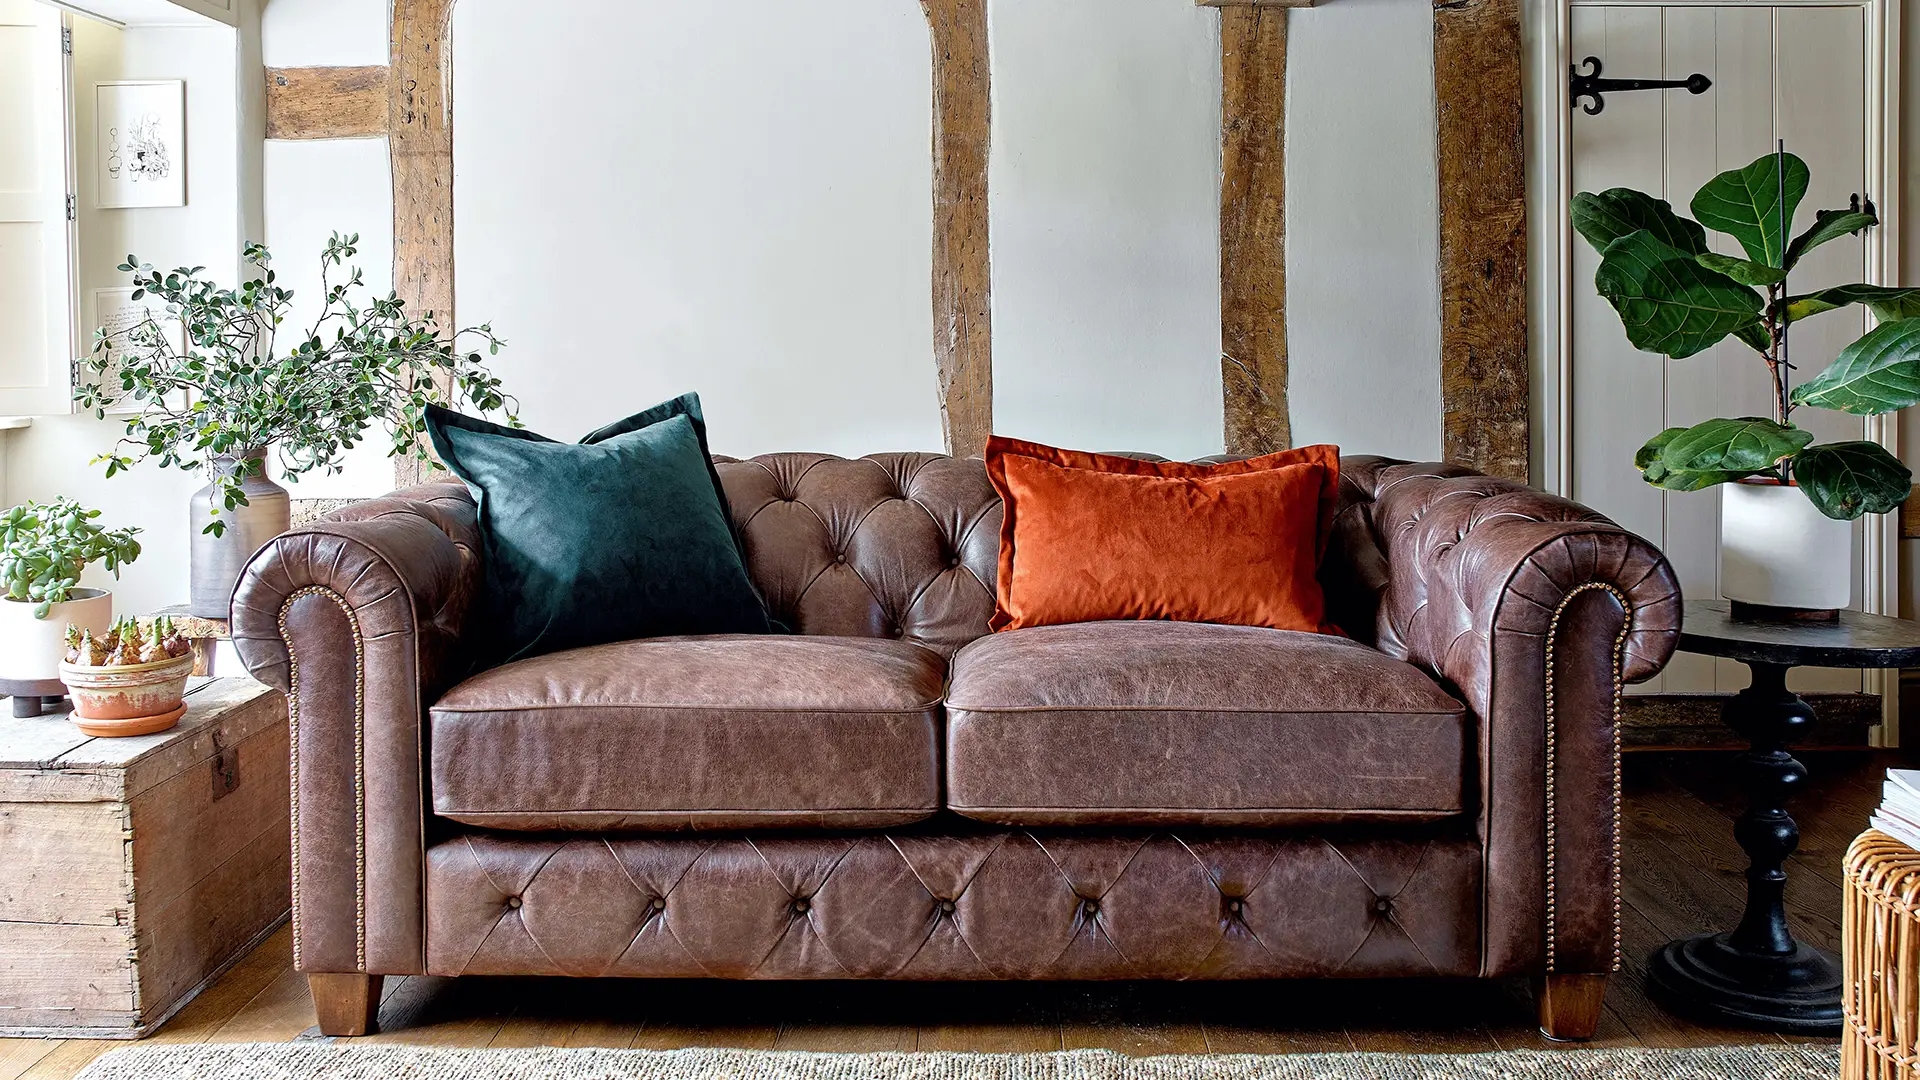 How to soften a leather sofa that is too firm